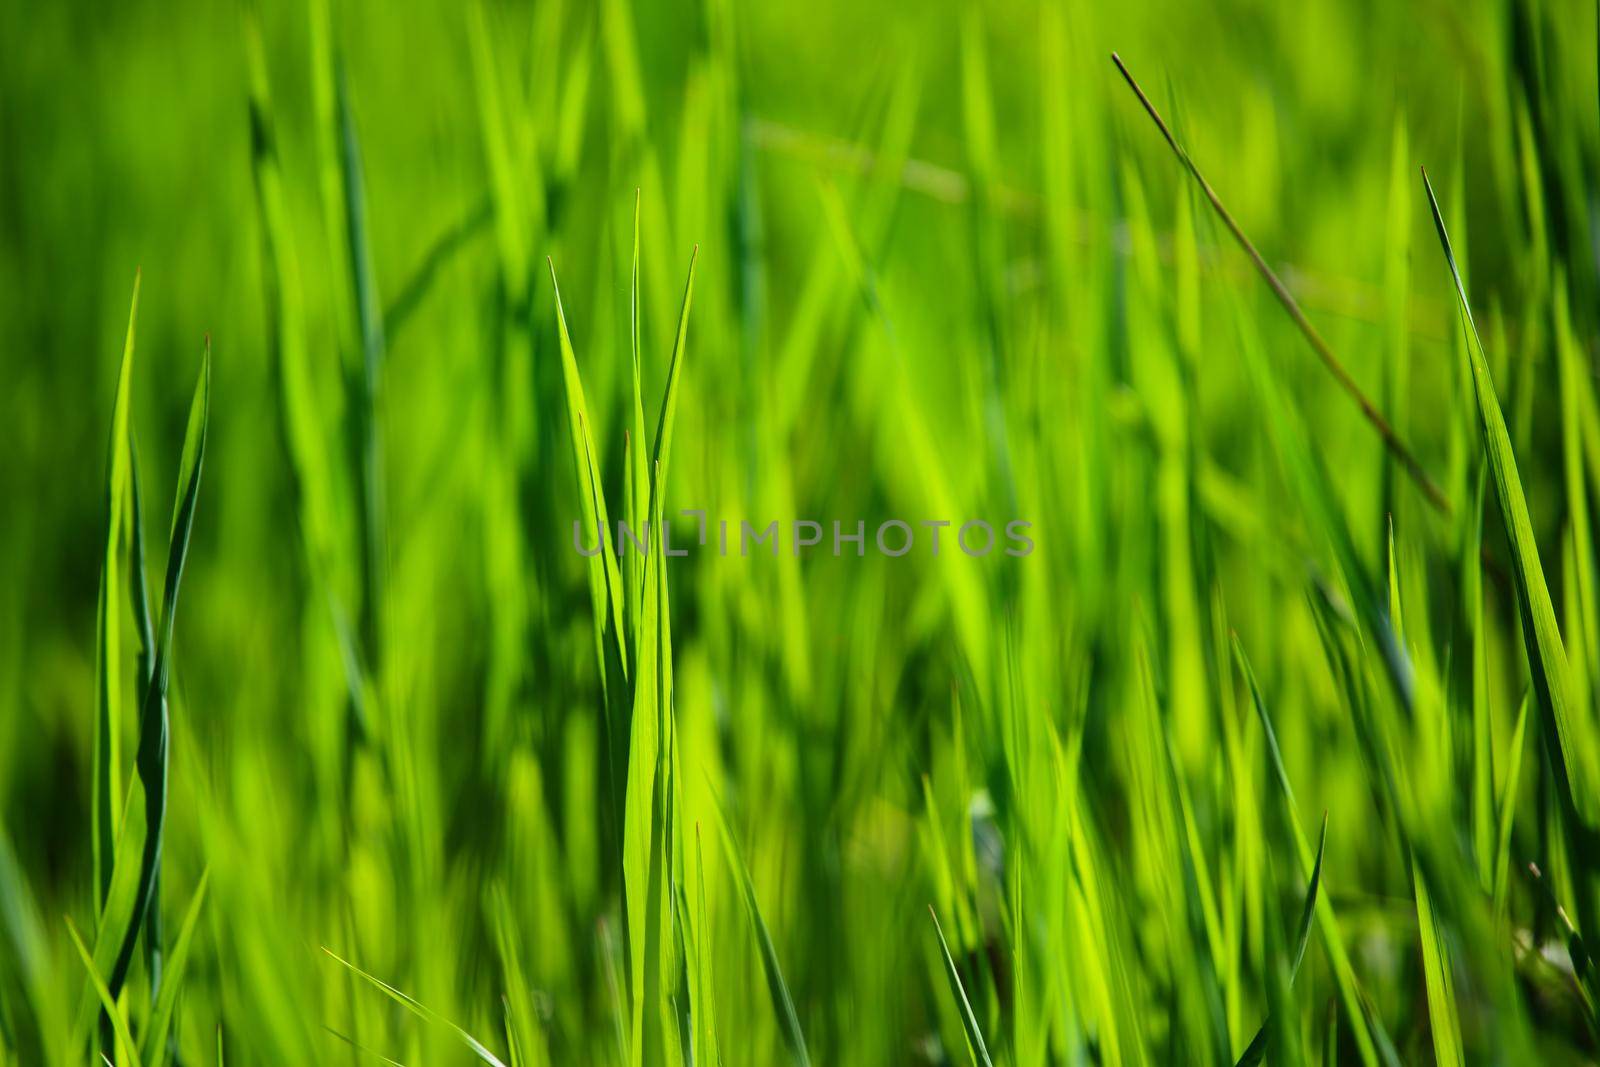 Perfect green natural background of fresh grass in sunlight